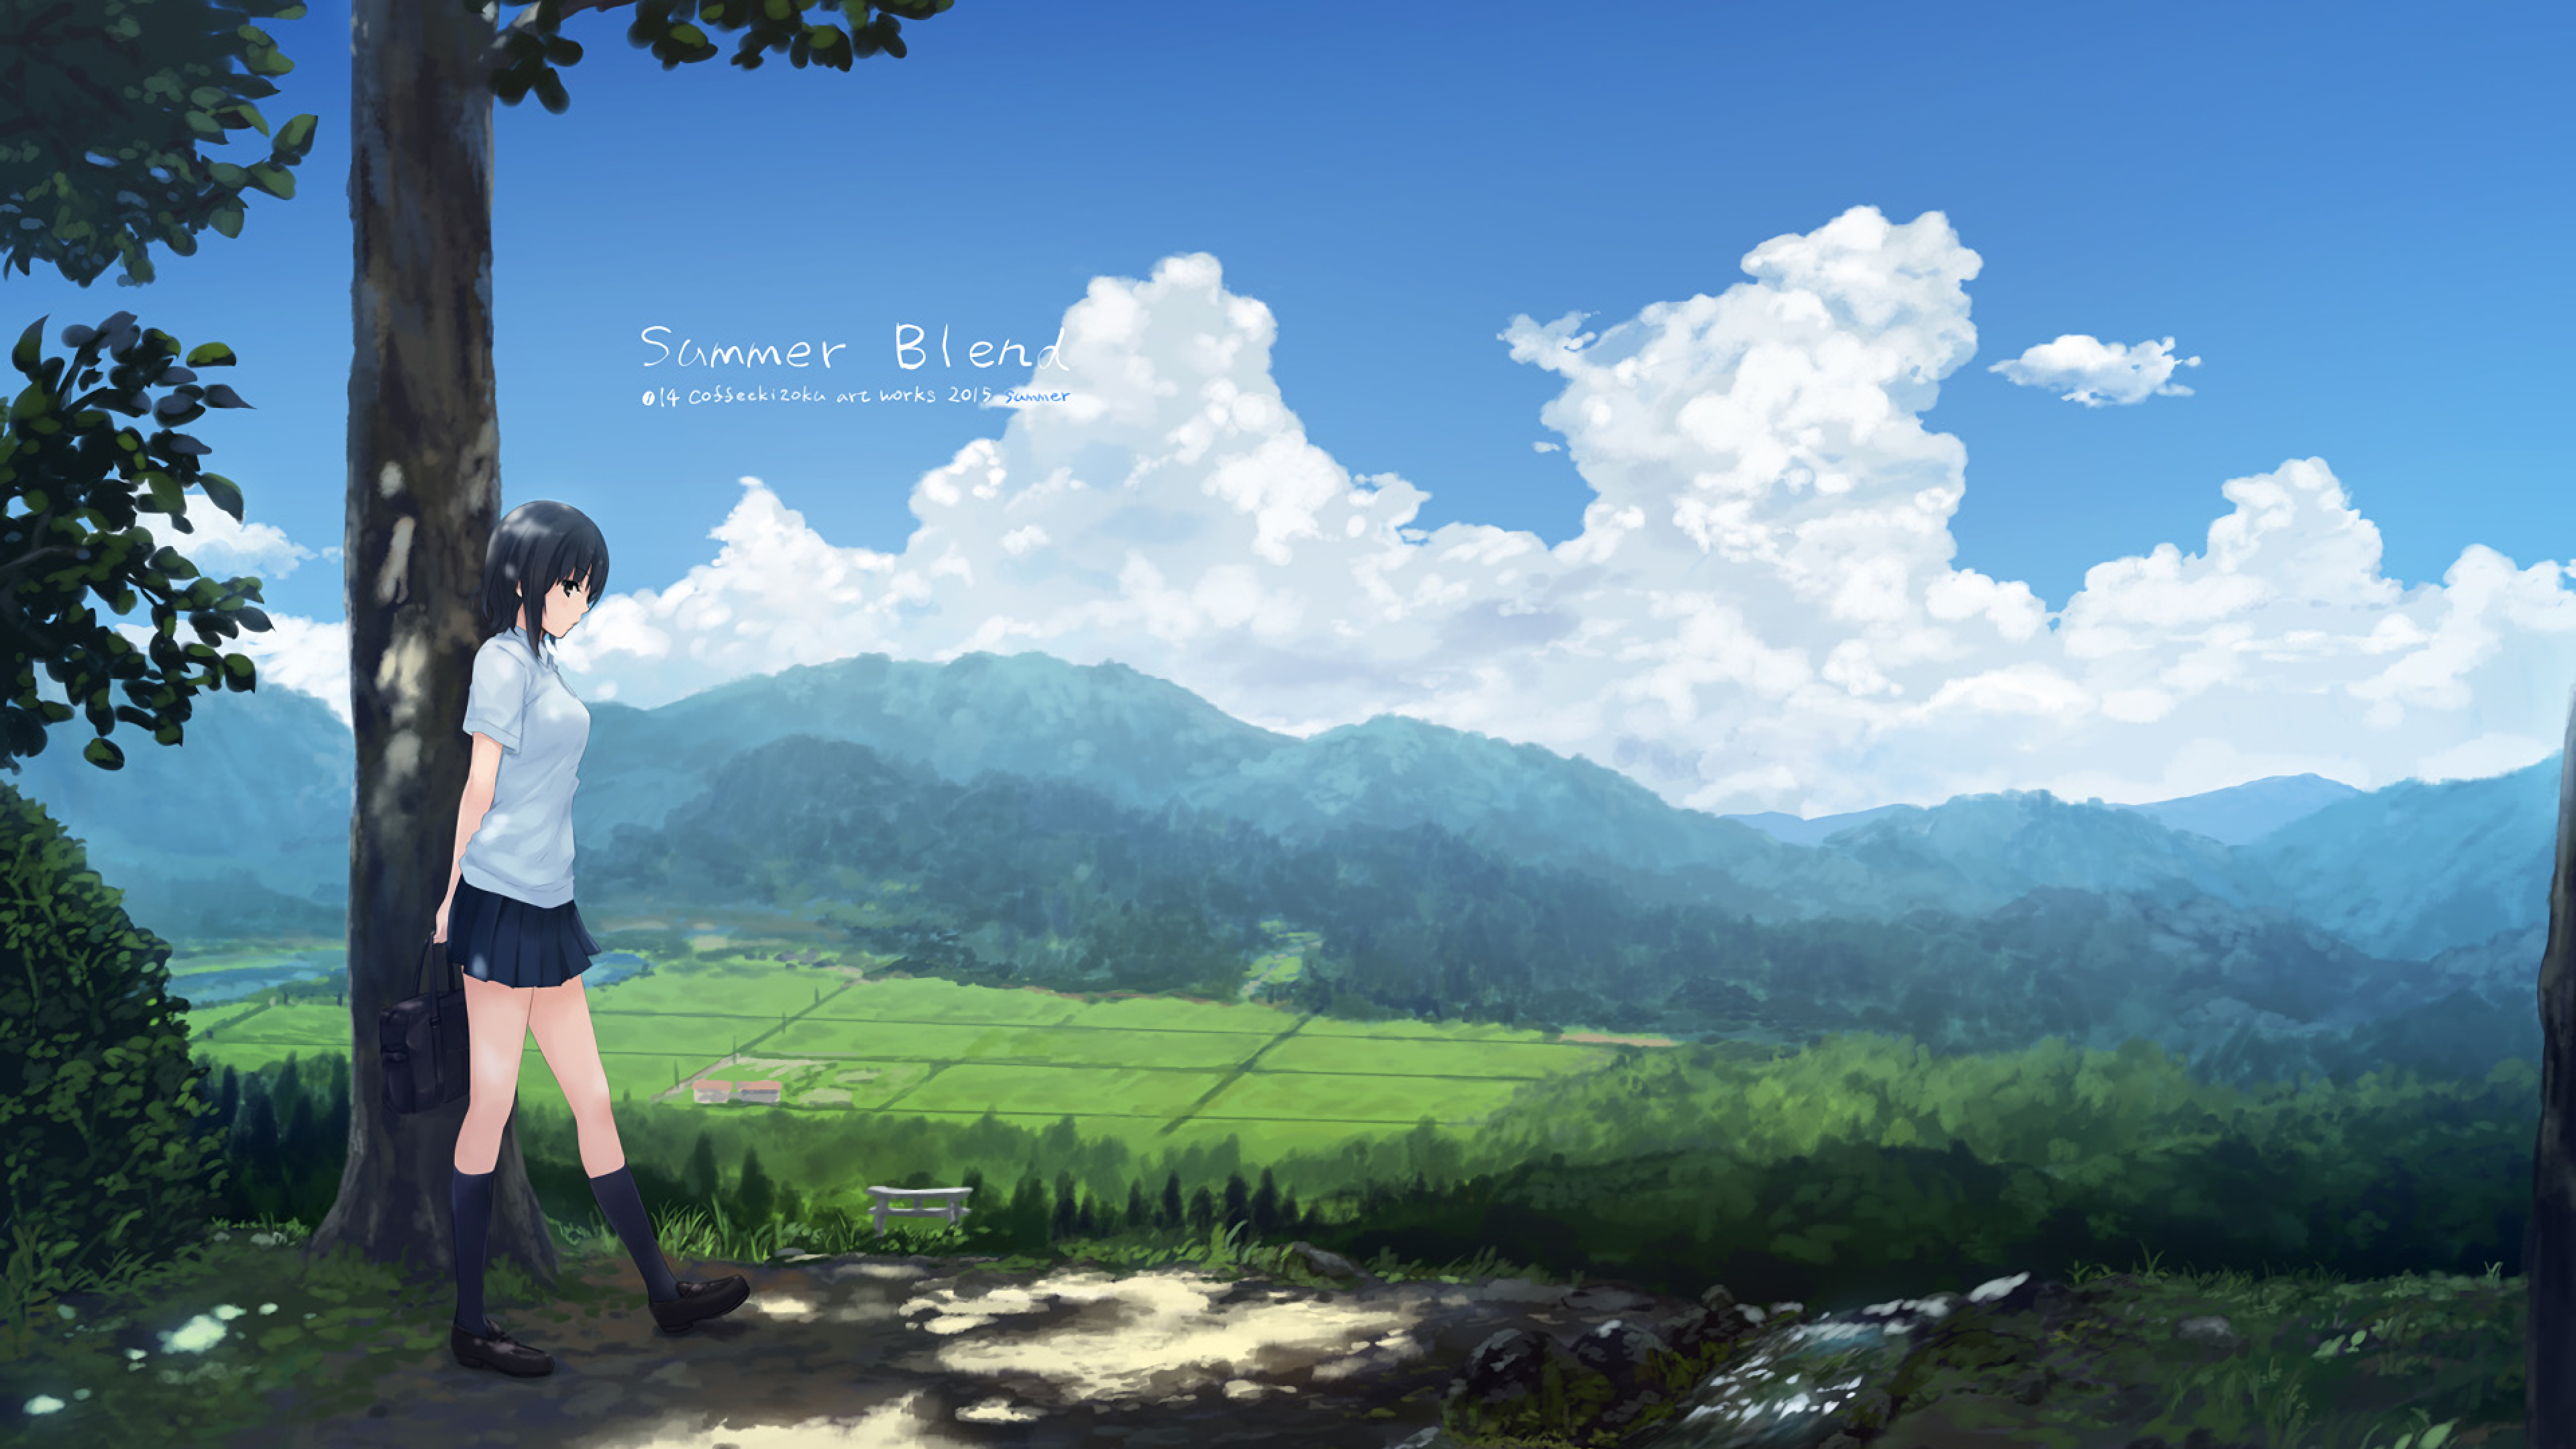 Download 3840x2160 Anime Landscape, Scenic, Girl, Summer Blend, Sky, Clouds, Field Wallpaper for UHD TV